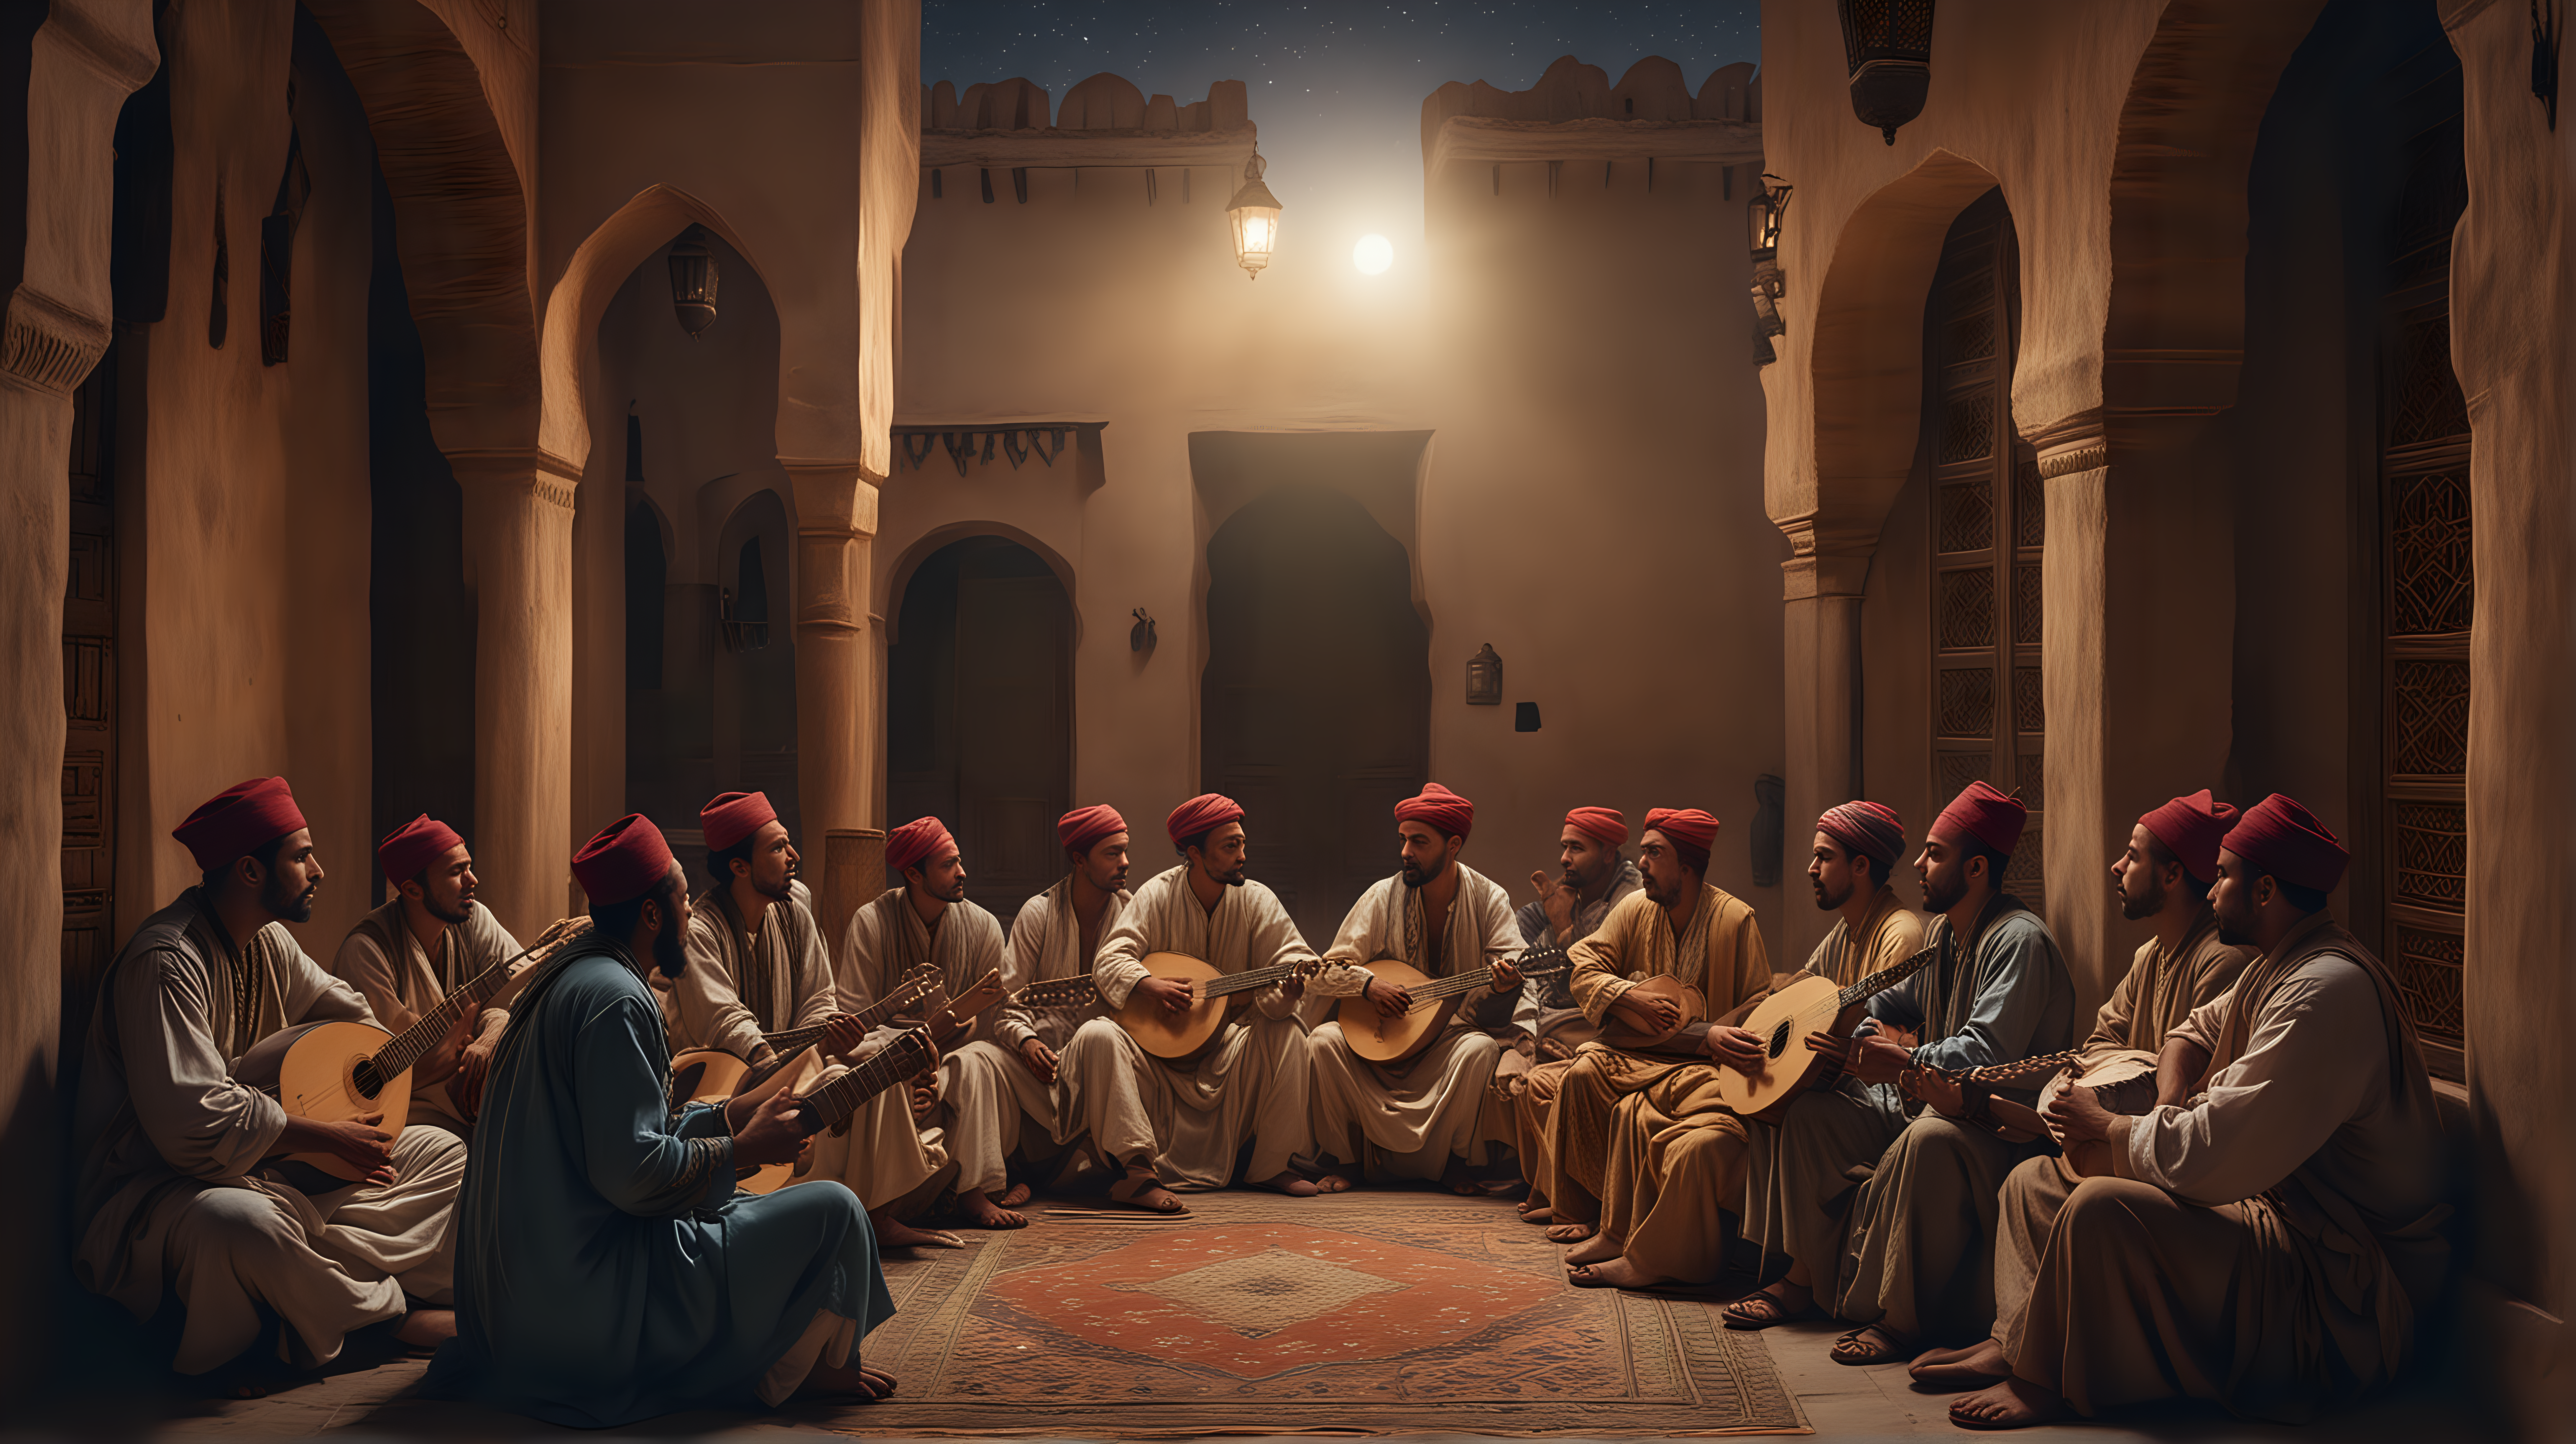 only one single Moroccan traditional musician plays his lute in the courtyard of a Moroccan traditional house, strumming his lute, a crowd of men sit around him enjoying the performance, night time, sky can be seen above, full moon shining, very realistic, cinematic, orientalist painters style